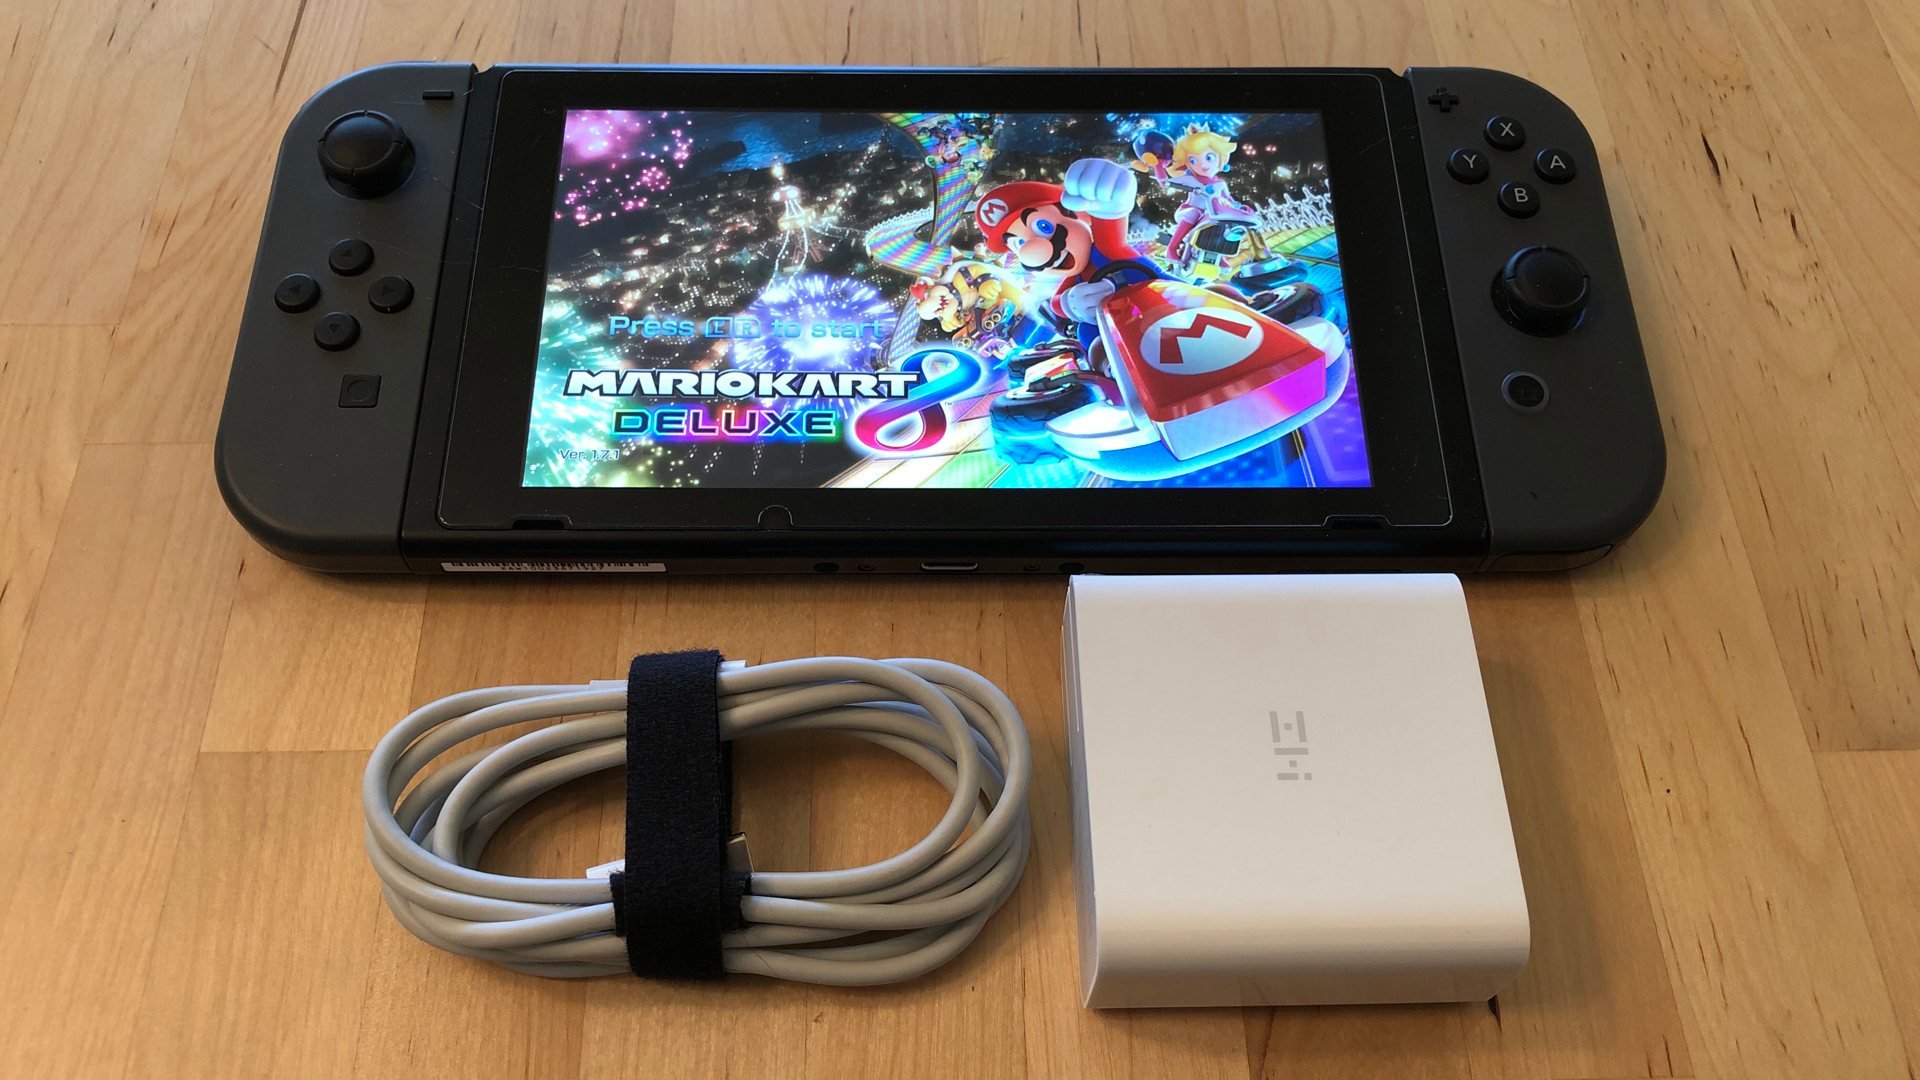 charger type for nintendo switch